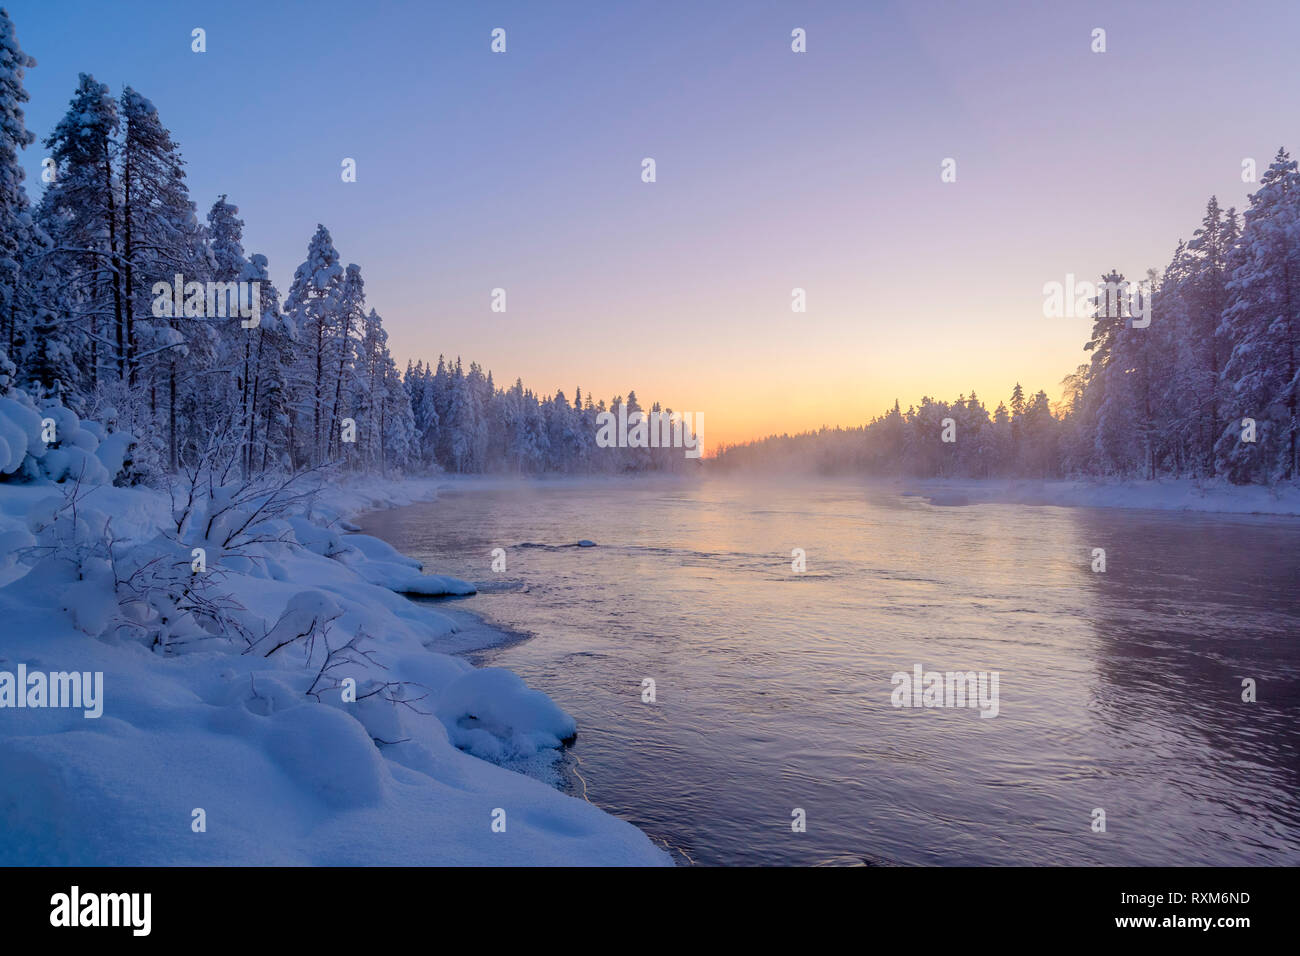 Mist and fog rising from the open water of a streaming river during a cold and clear sunset at -30º C, Kiveskoski River, Kuusamo, Finland Stock Photo